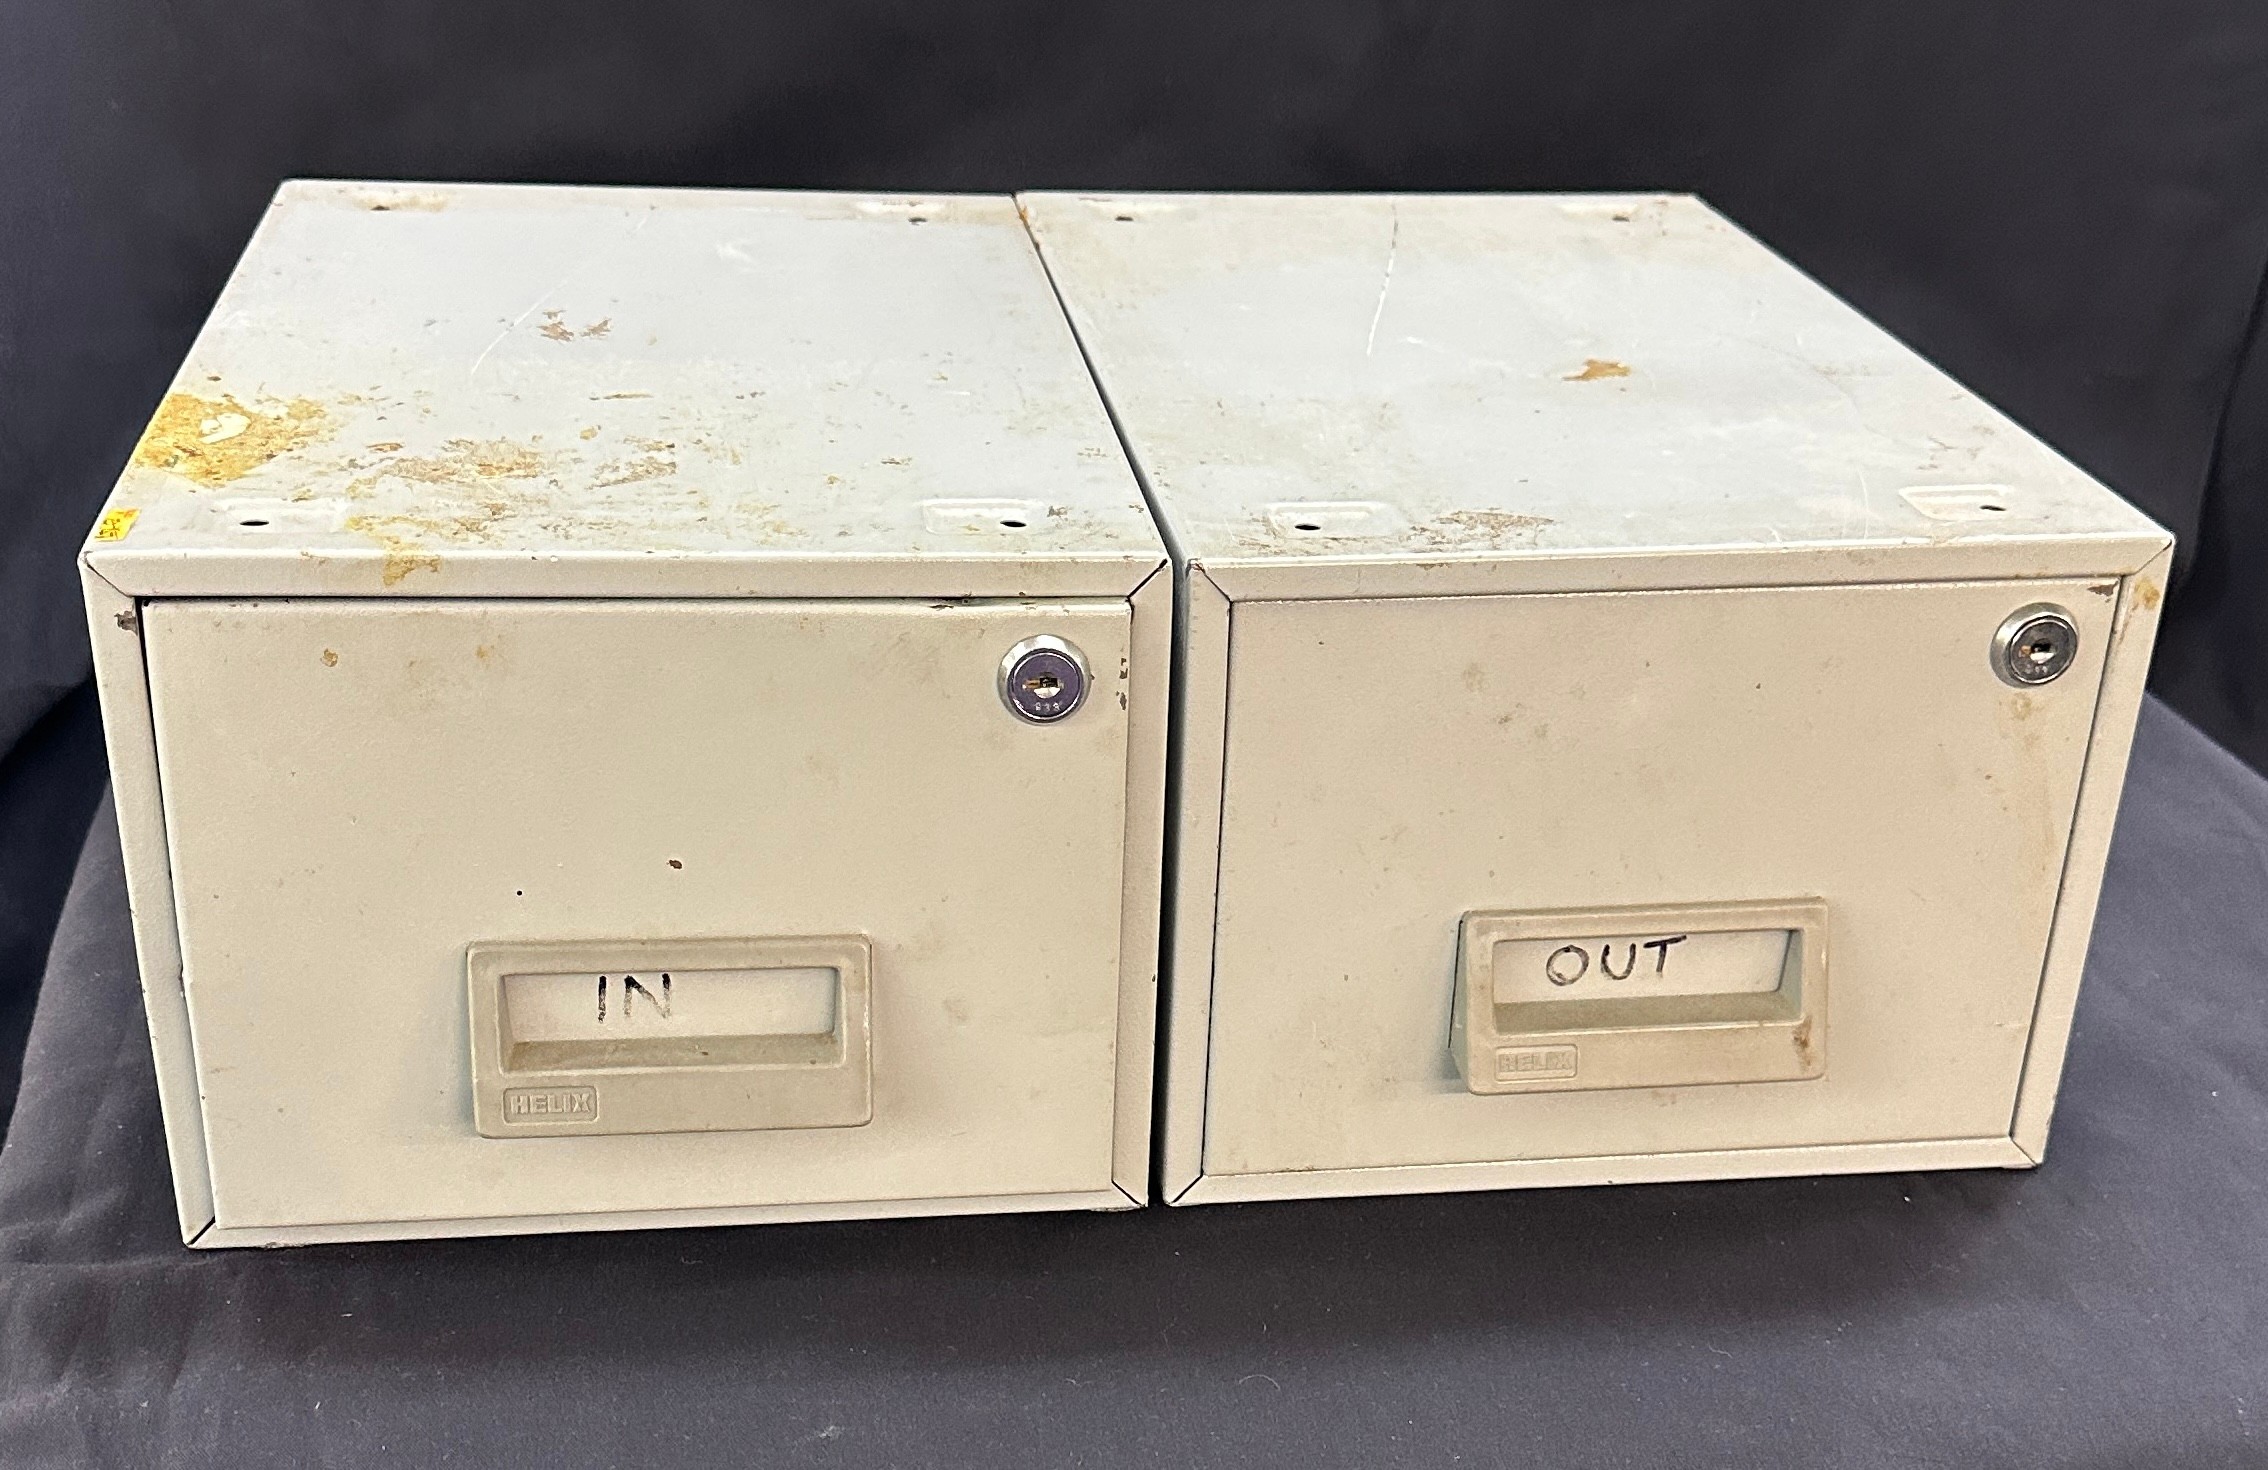 Double set of metal drawers measures approx width 19 inches by 7 inches tall - Bild 2 aus 3